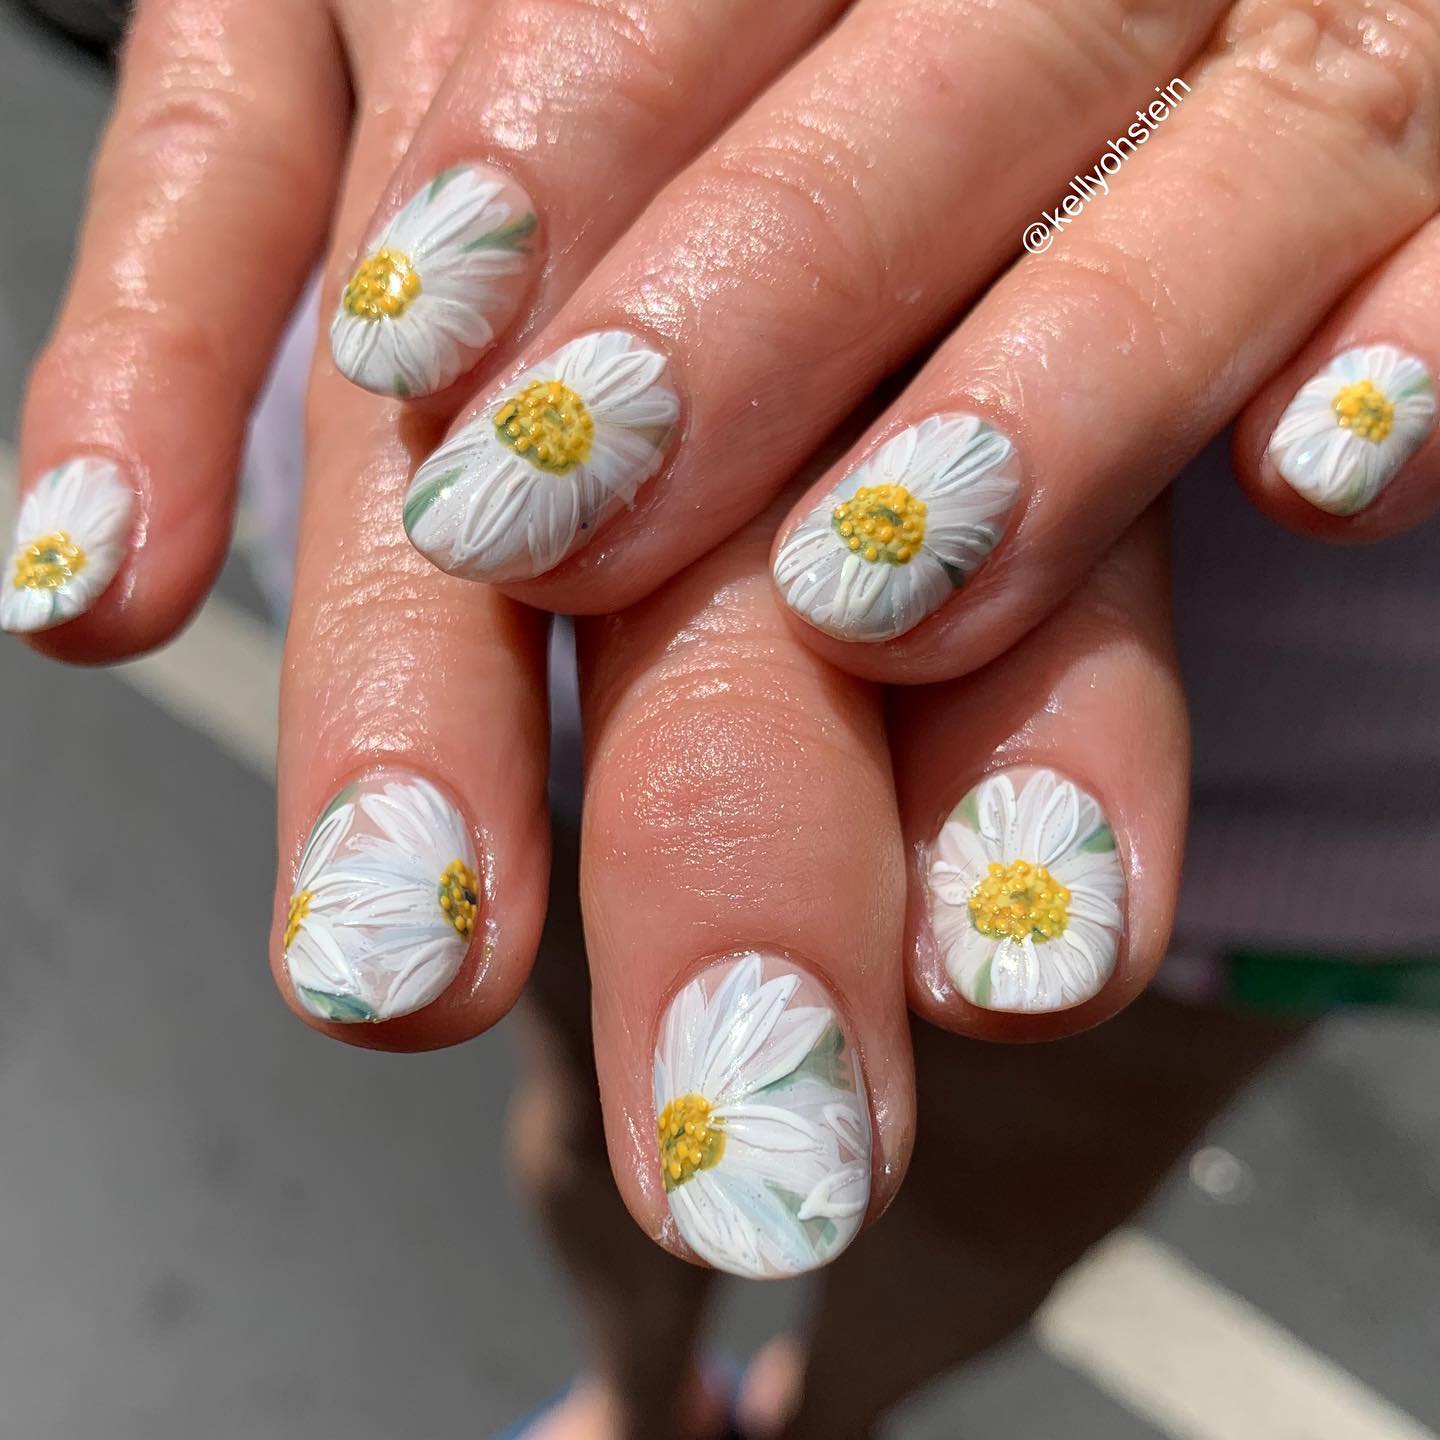 A white daisy symbolizes purity, innocence and new beginnings. All of these meanings make this flower perfect for your wedding nails. Let's cover your nails with daises and feel their purity. 